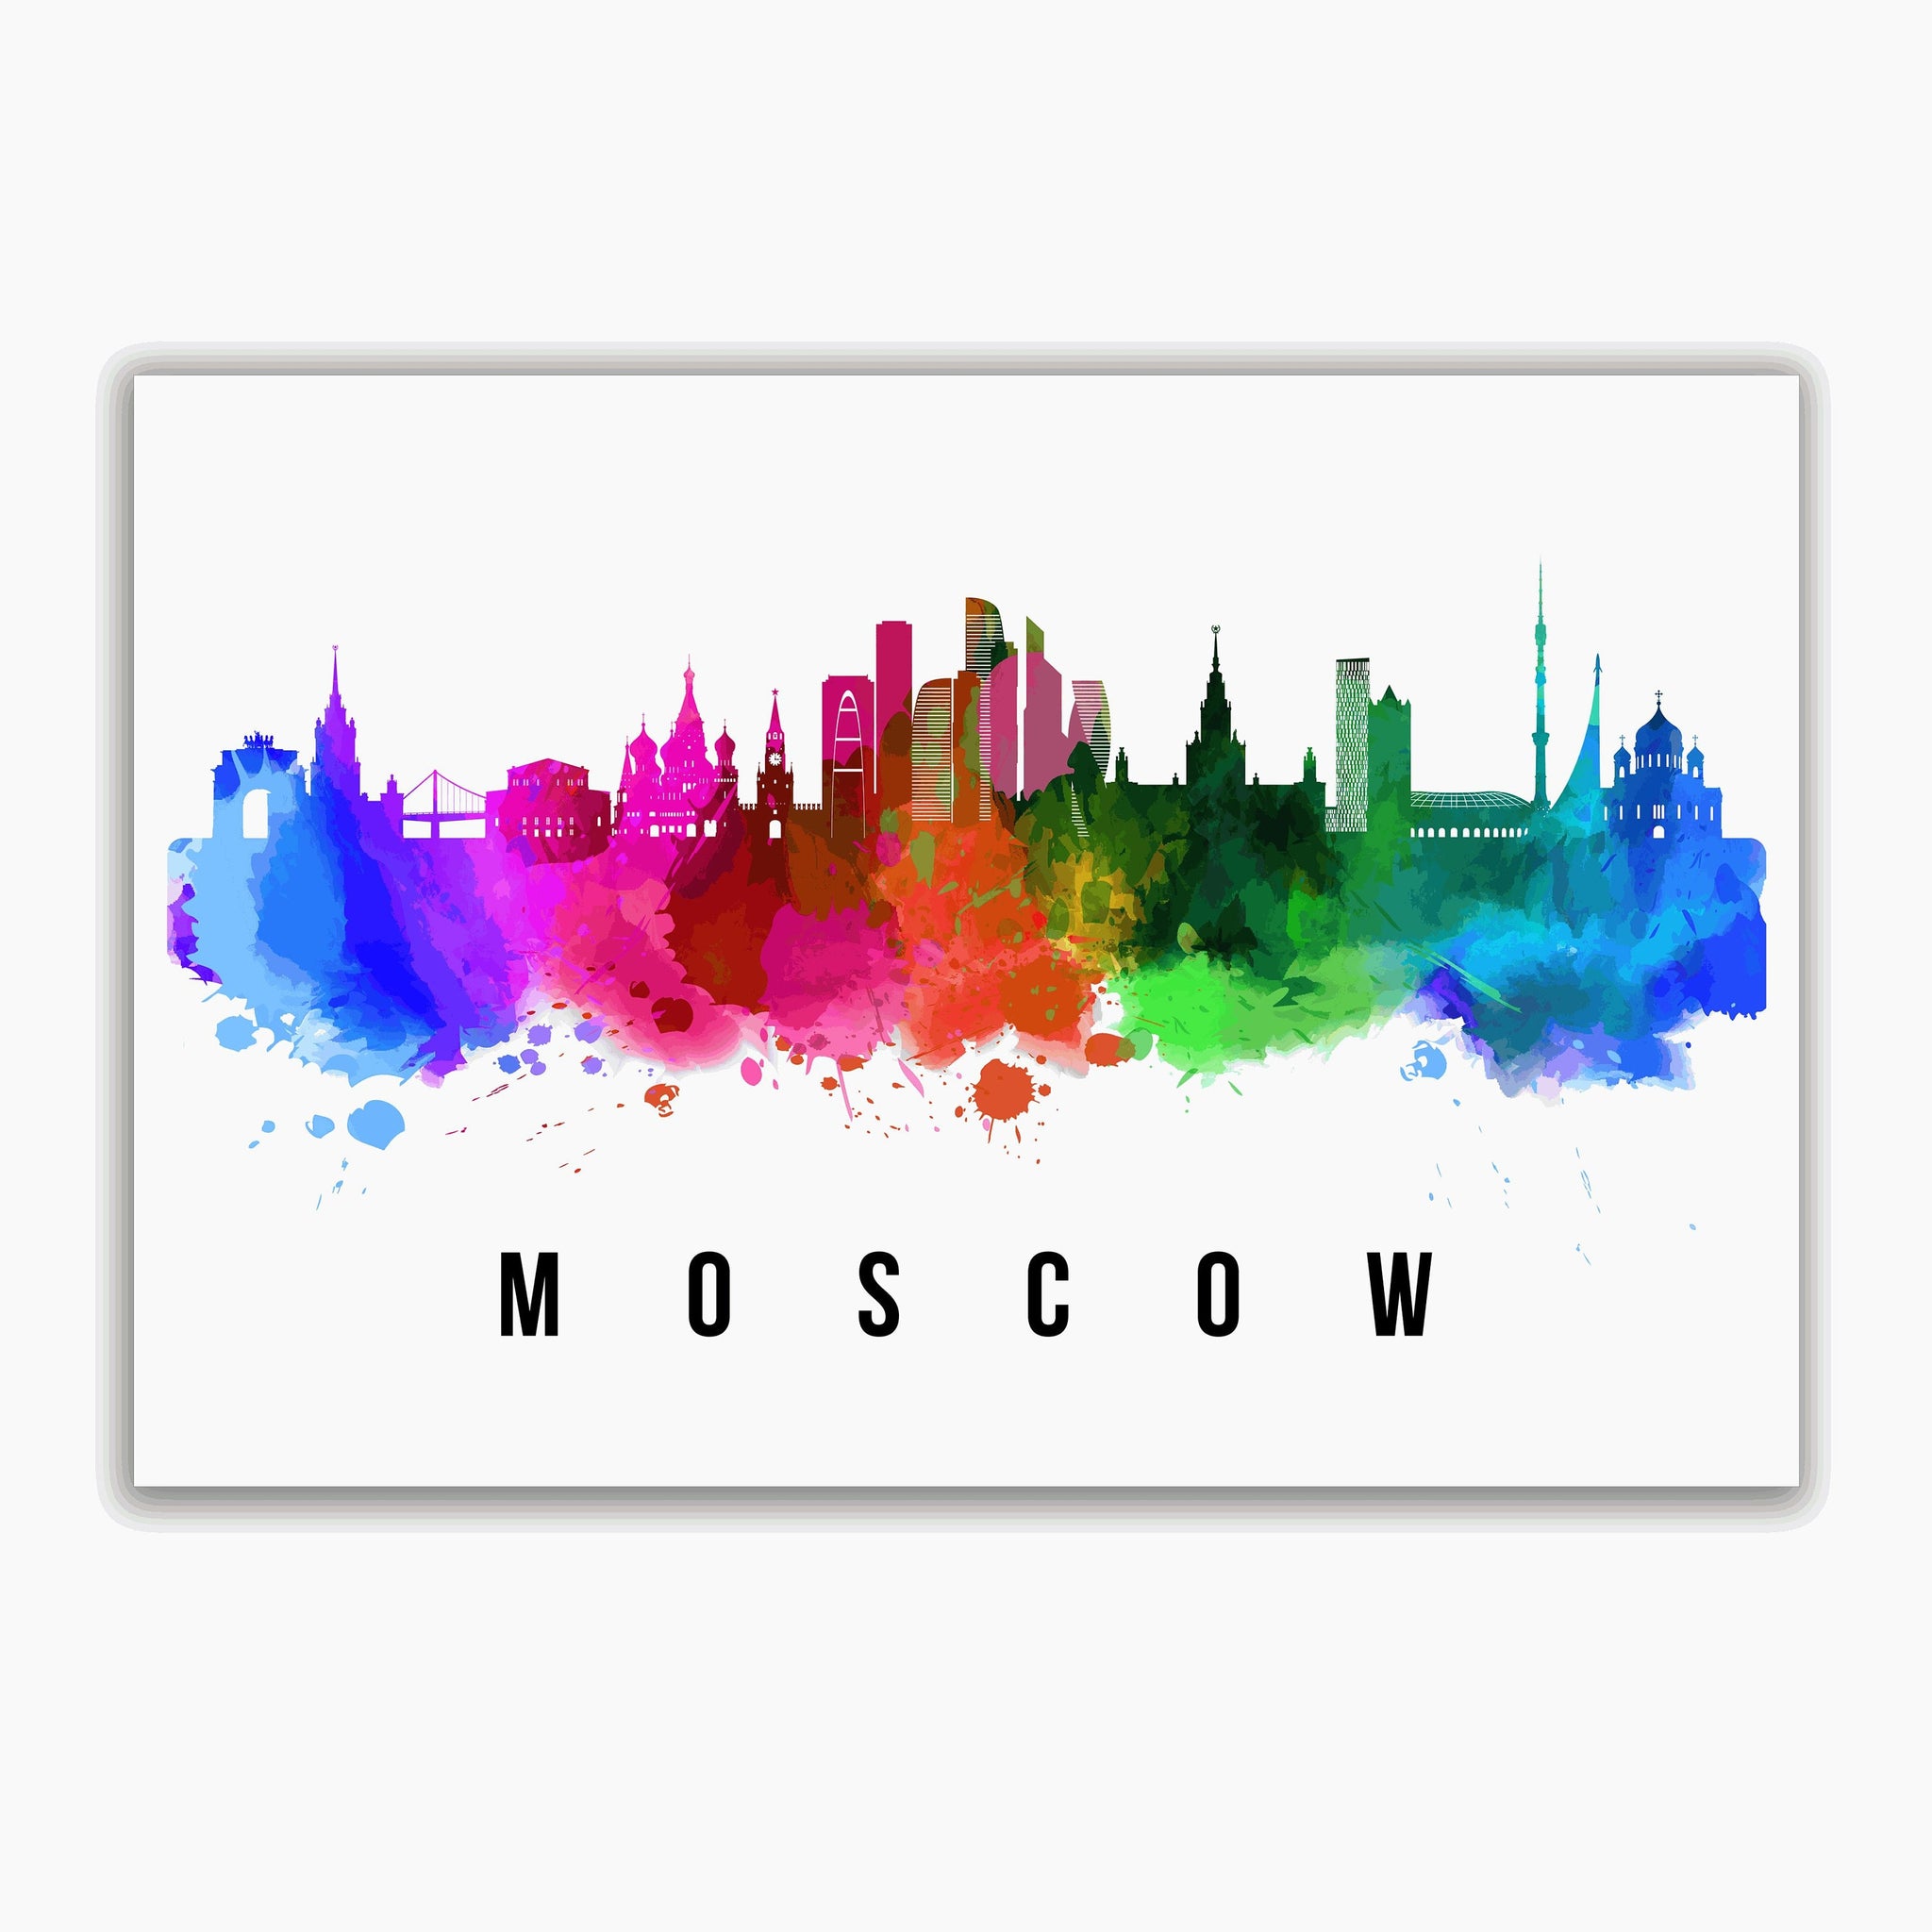 MOSCOW - RUSSIA Poster, Skyline Poster Cityscape and Landmark Moscow City Illustration Home Wall Art, Office Decor